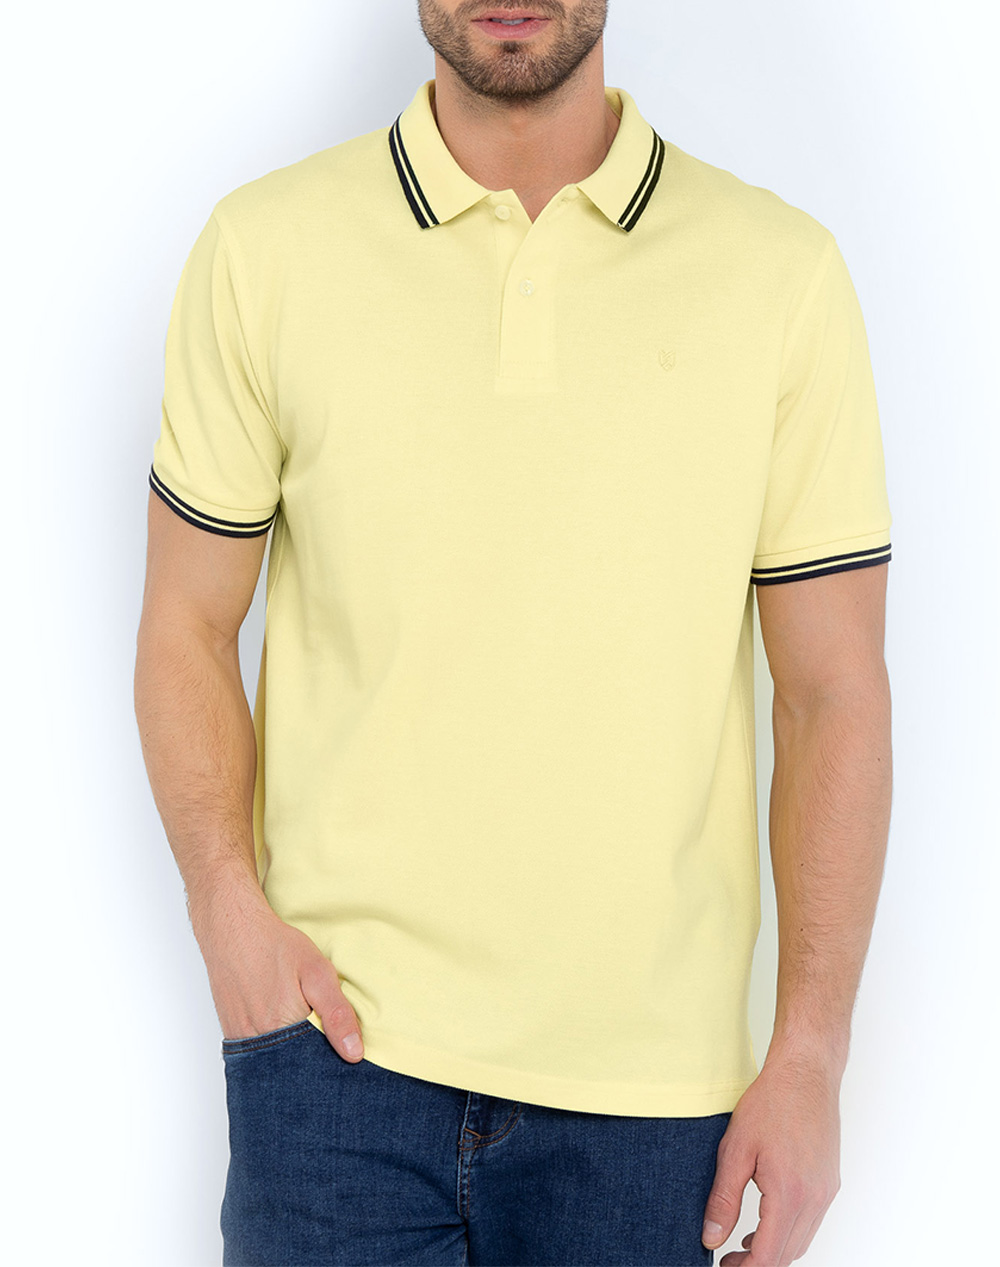 THE BOSTONIANS ΜΠΛΟΥΖΑ POLO PIQUE TWIN TIPPED REGULAR 3PS1271-LIGHT Yellow